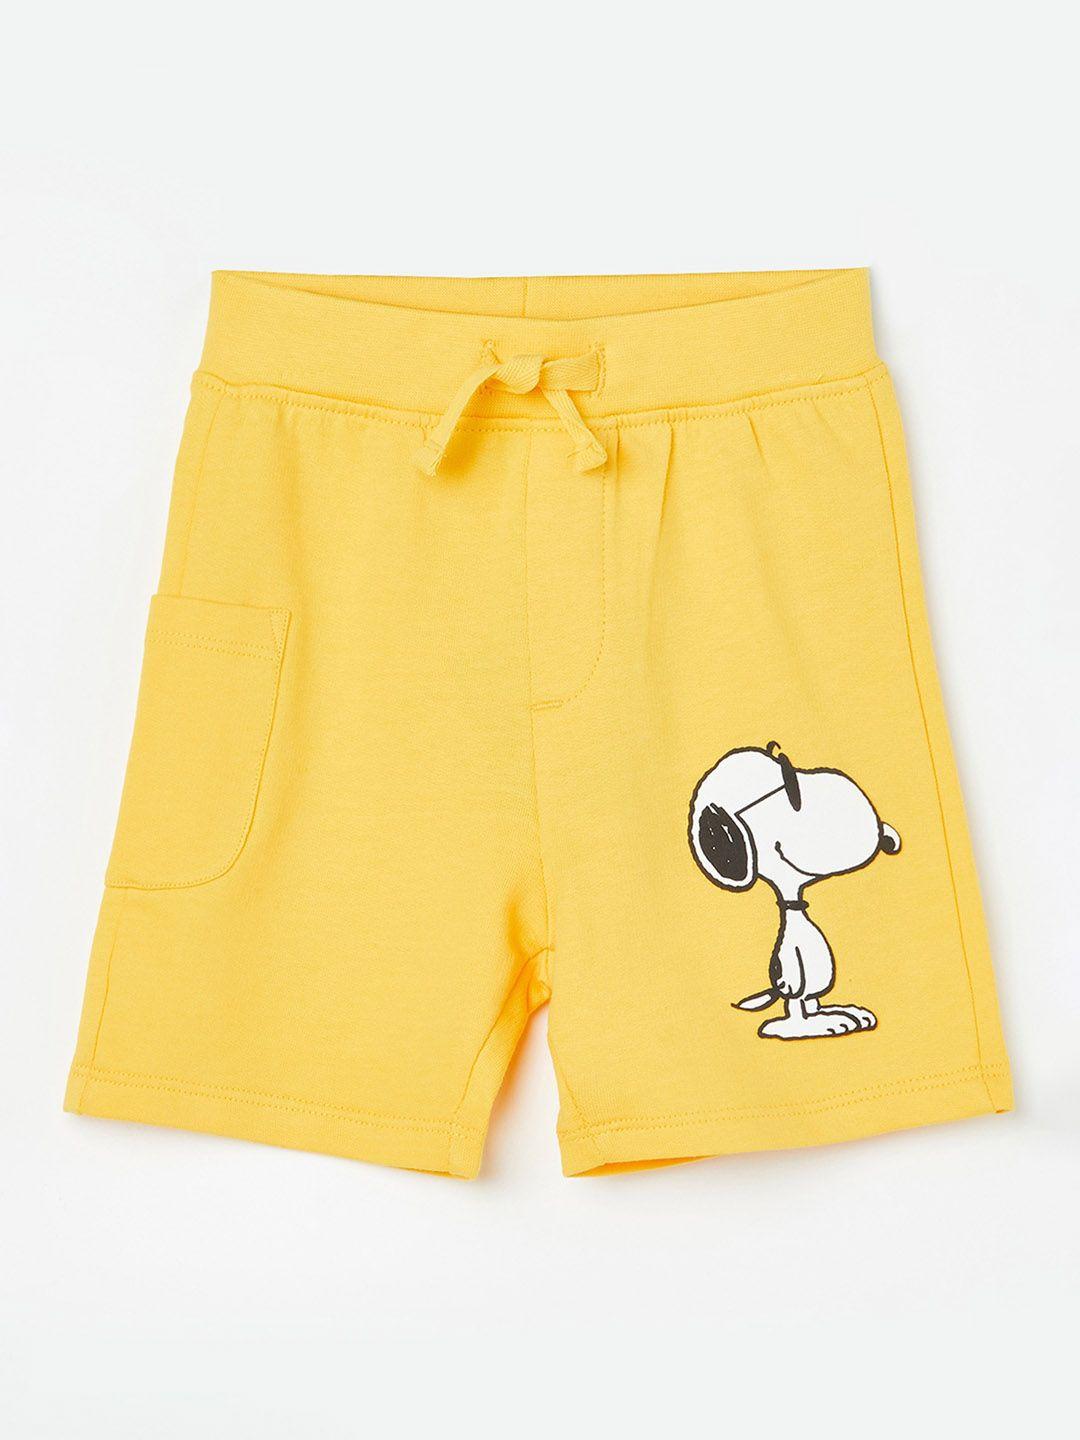 Juniors by Lifestyle Boys Snoopy Printed Pure Cotton Shorts